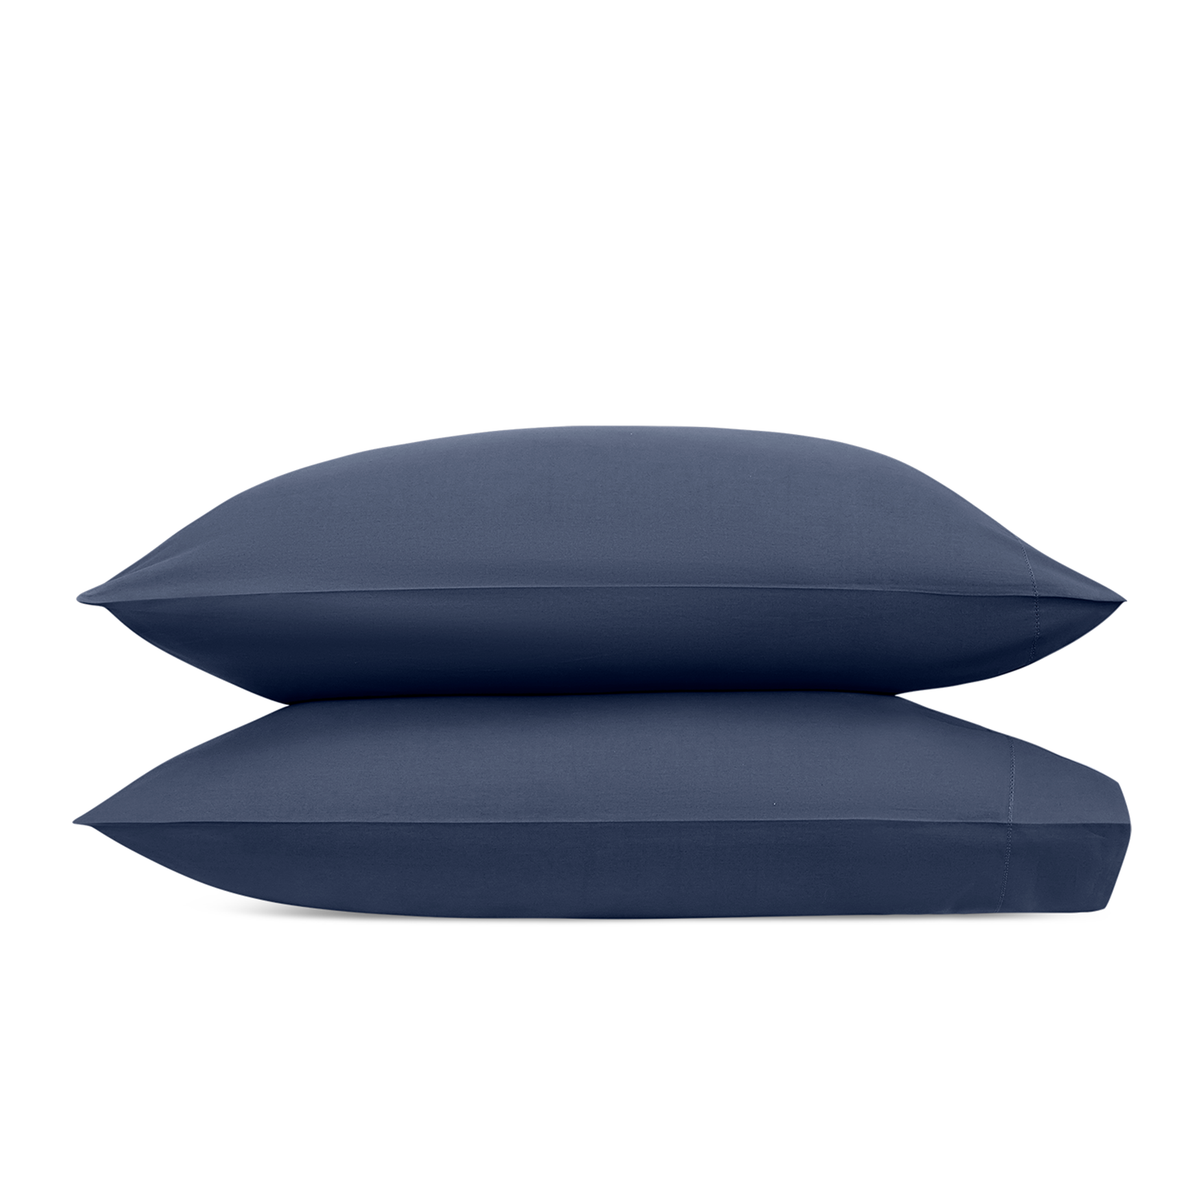 Pair of Pillowcase of Matouk Milano Hemstitch Bedding in Color Steel Blue